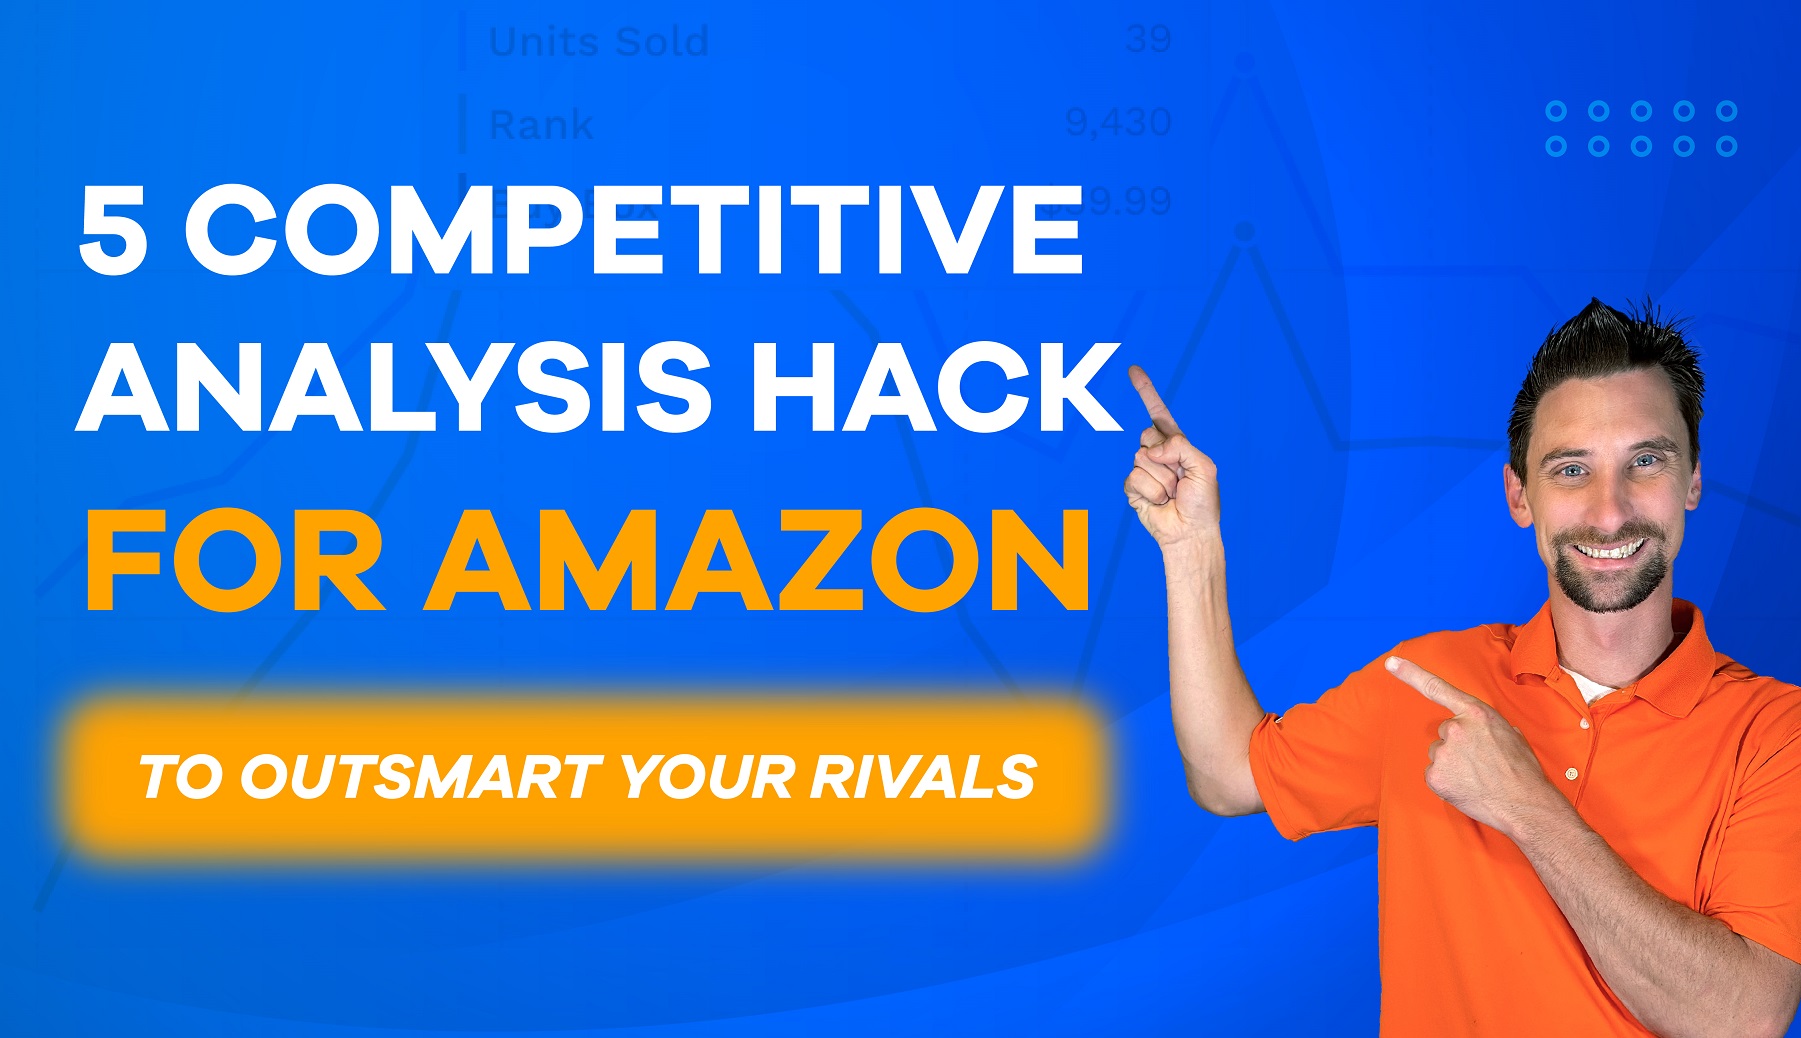 Competitive Analysis Hack For Amazon To Outsmart Your Rivals